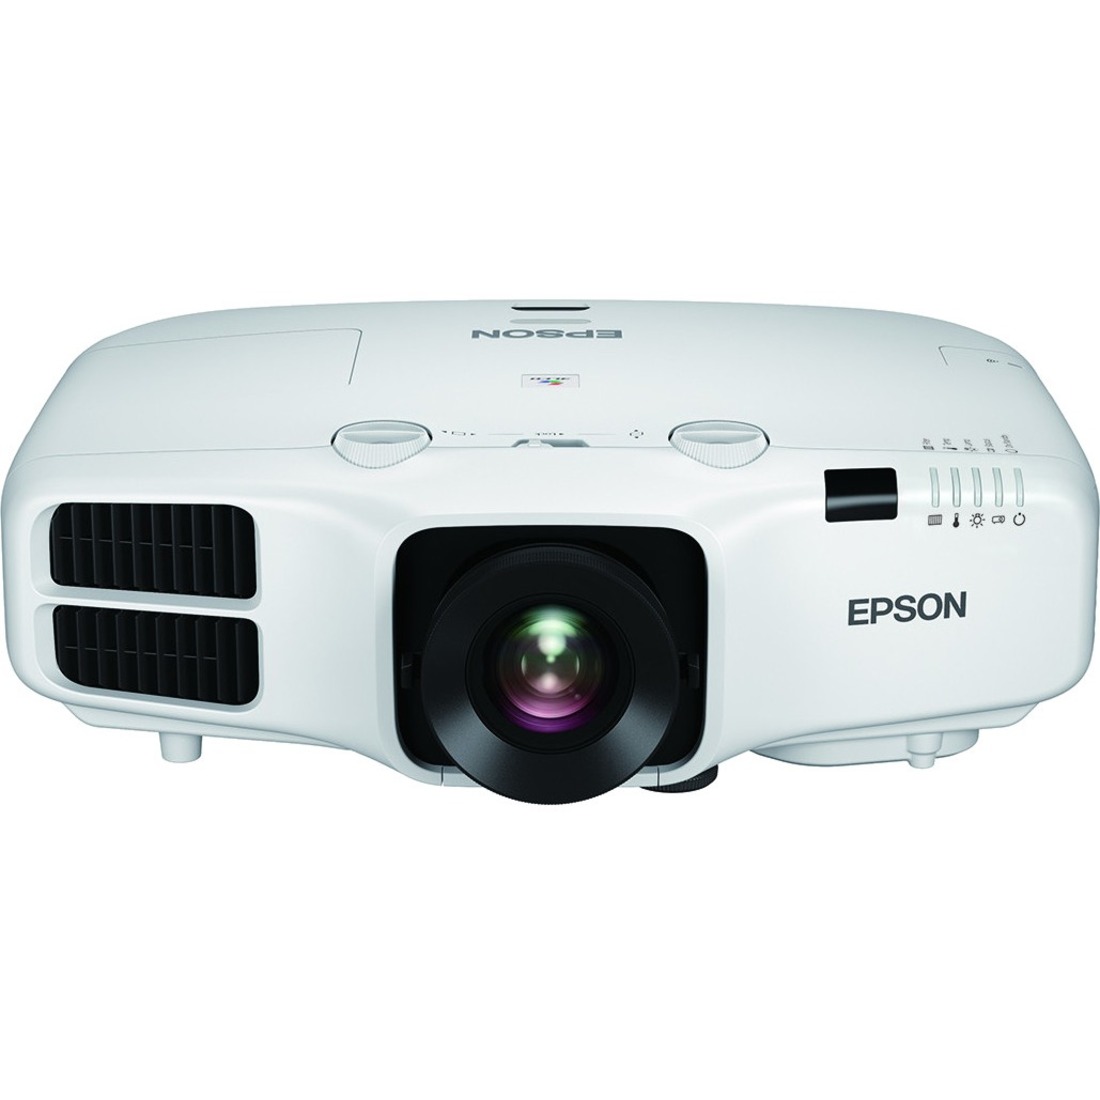 Epson Powerlite 55w Lcd Projector 7p Hdtv 16 10 Rear Ceiling Front Uhe 300 W 5000 Hour Normal Mode Hour Economy Mode 1280 X 800 Wxga 15 000 1 5500 Lm Hdmi Usb 462 W V11h60